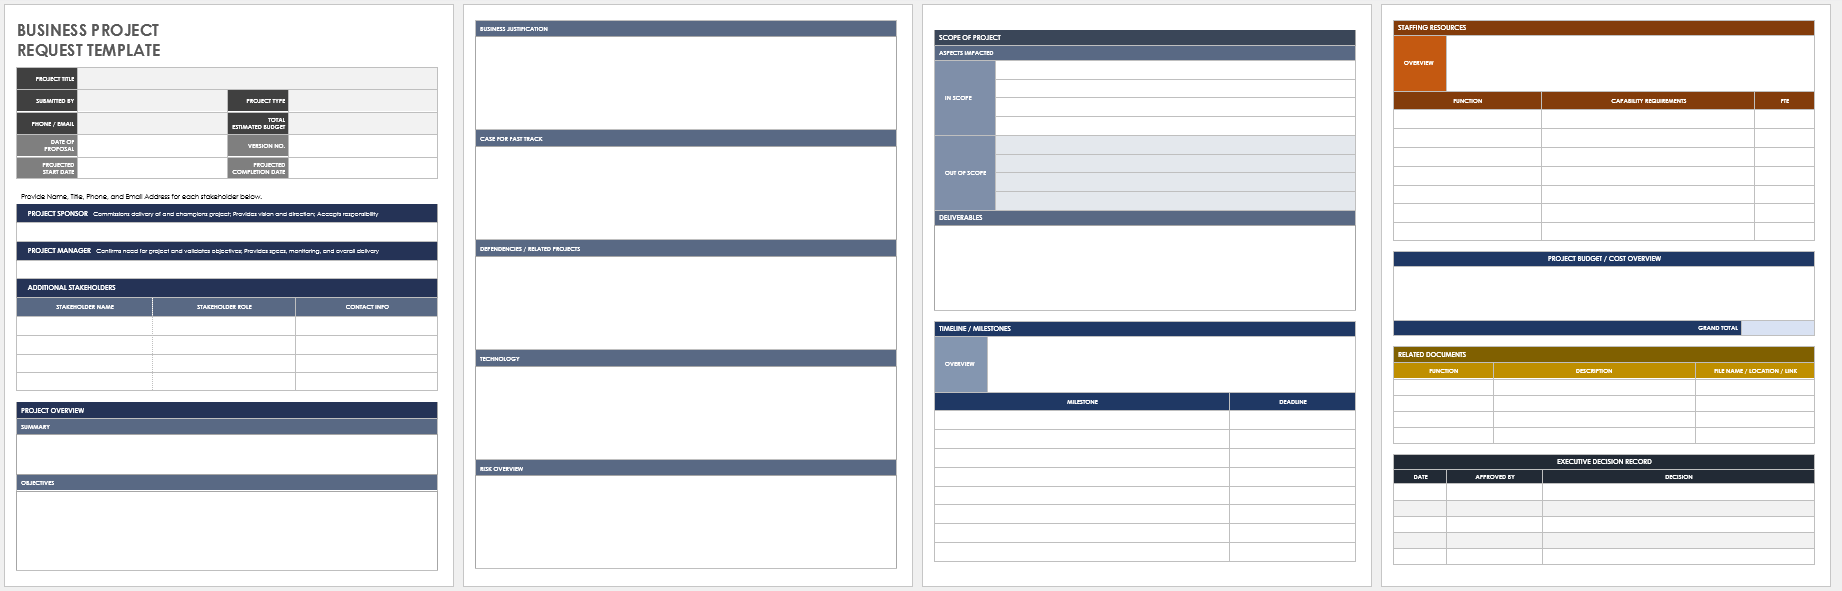 Business Project Request Template